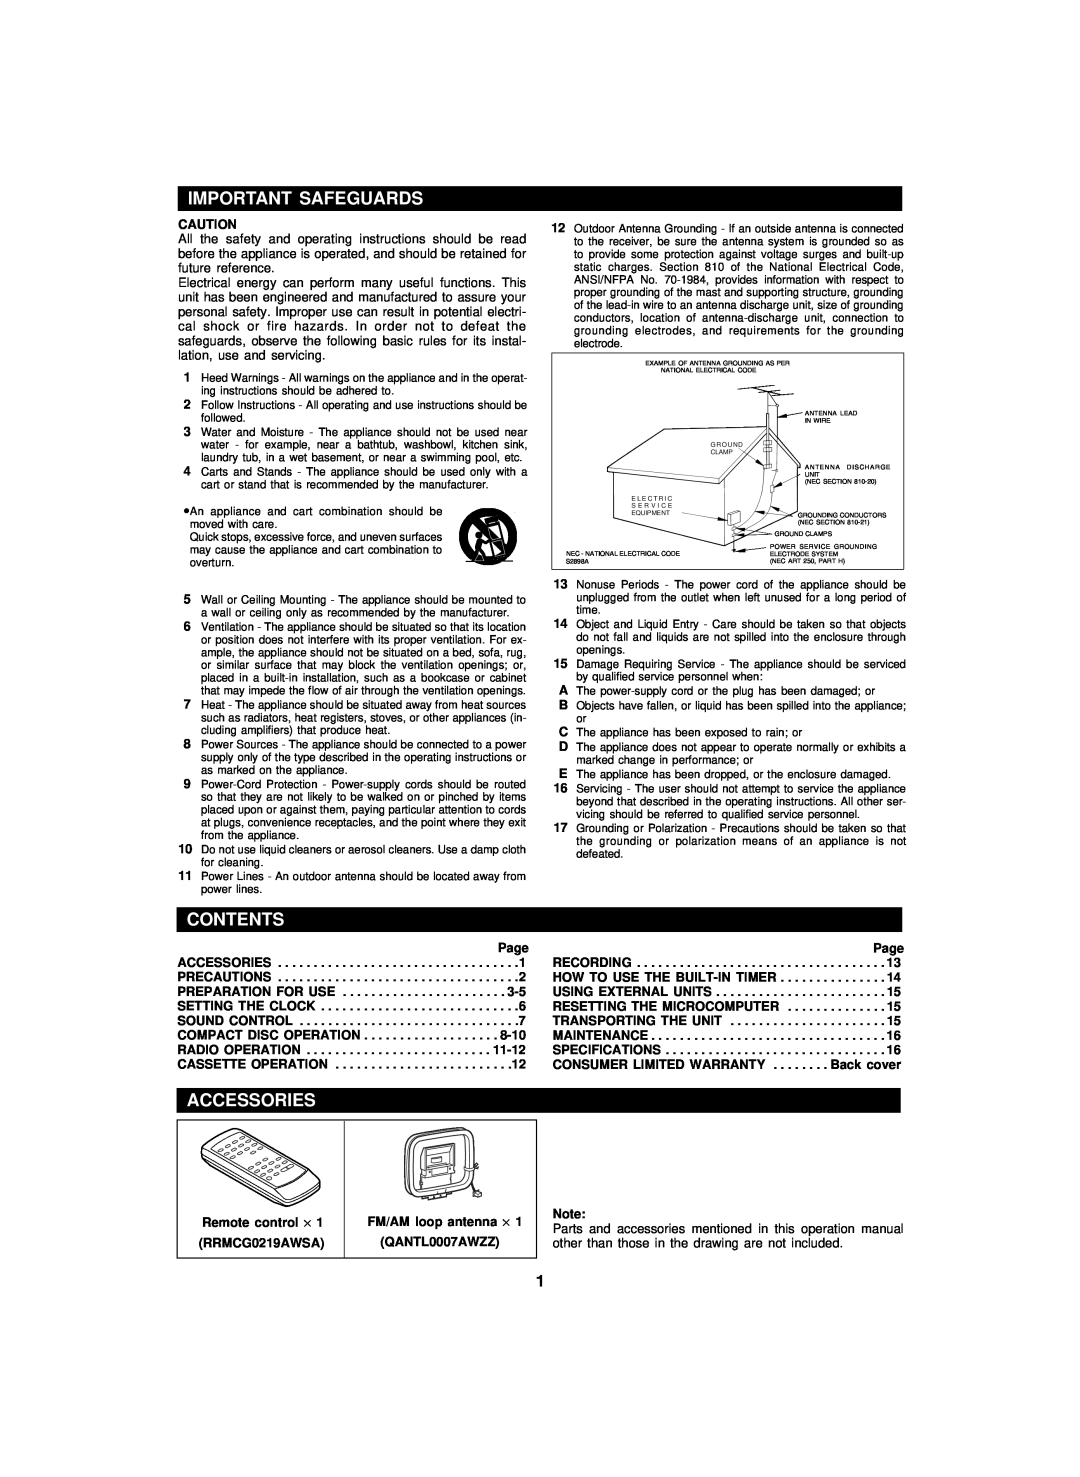 Sharp CD-BA200 operation manual Important Safeguards, Contents, Accessories, Remote control × RRMCG0219AWSA 